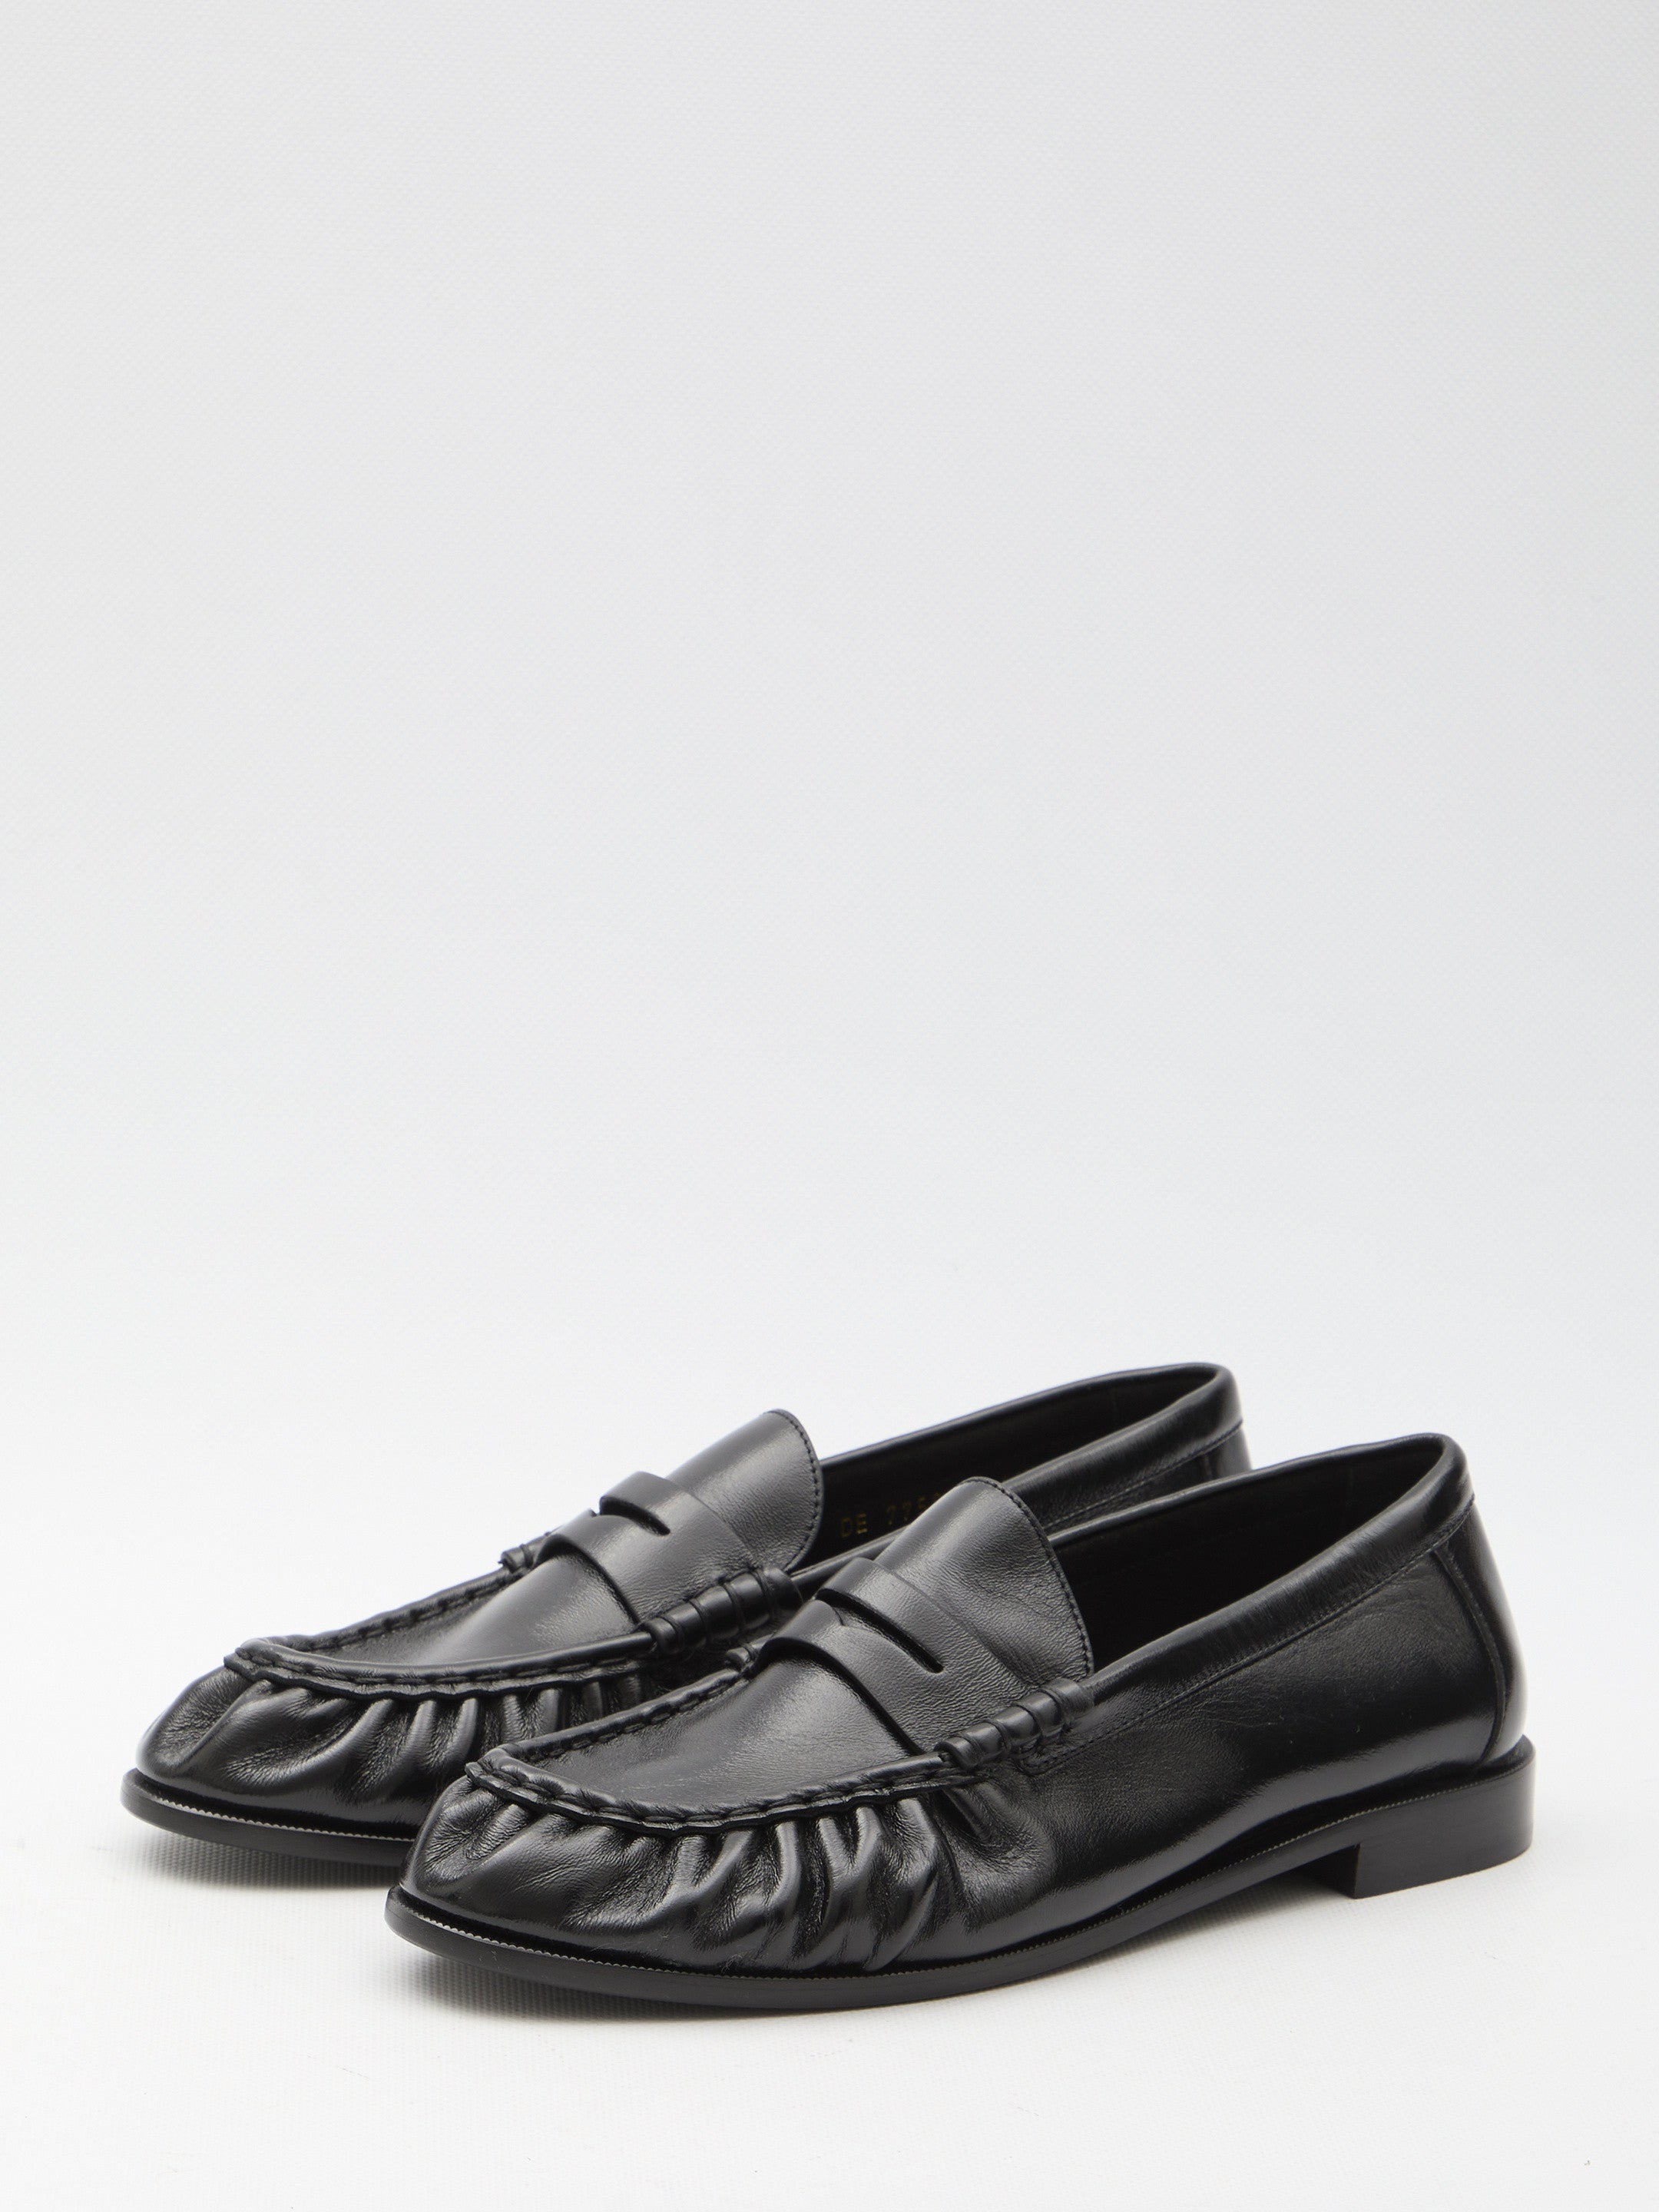 Le Loafer loafers